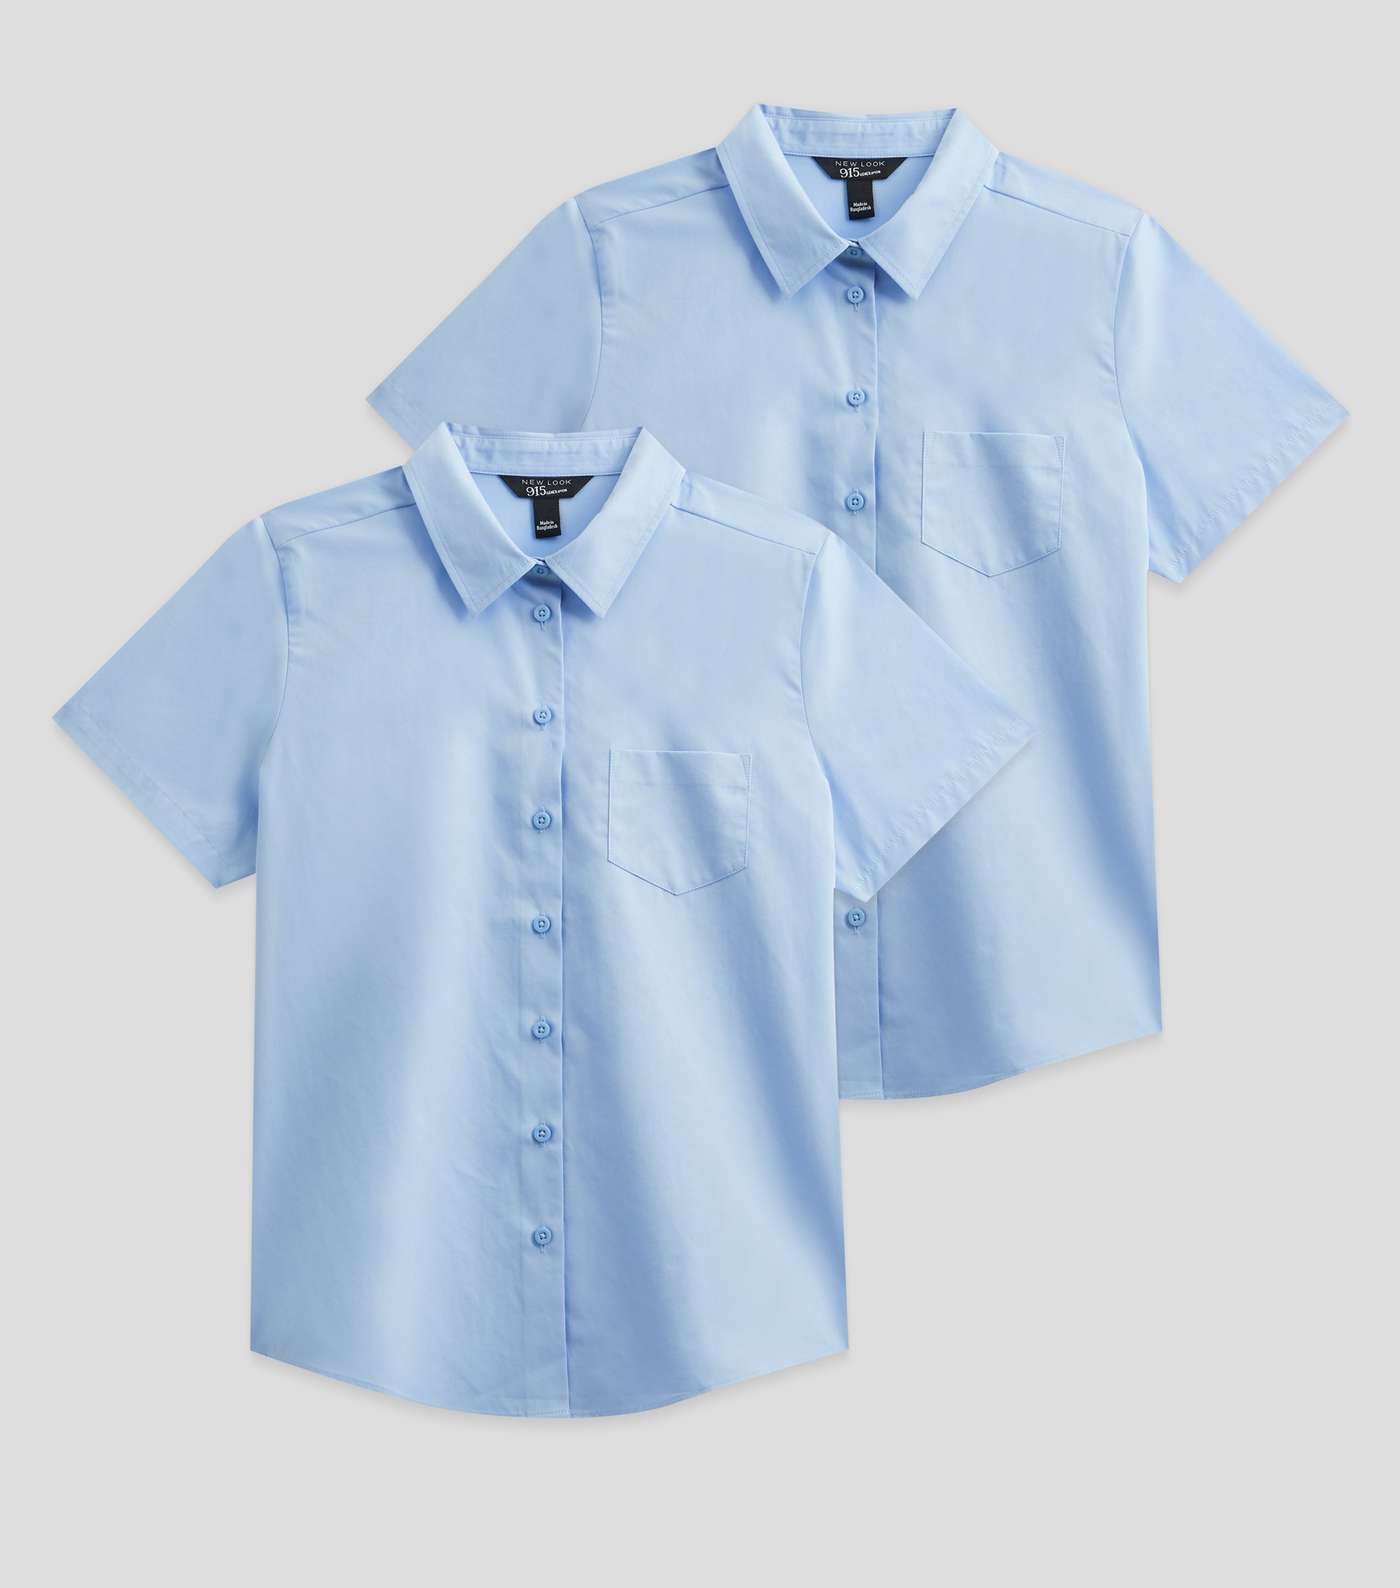 Girls 2 Pack Pale Blue Short Sleeve Easy Care School Shirts Image 5